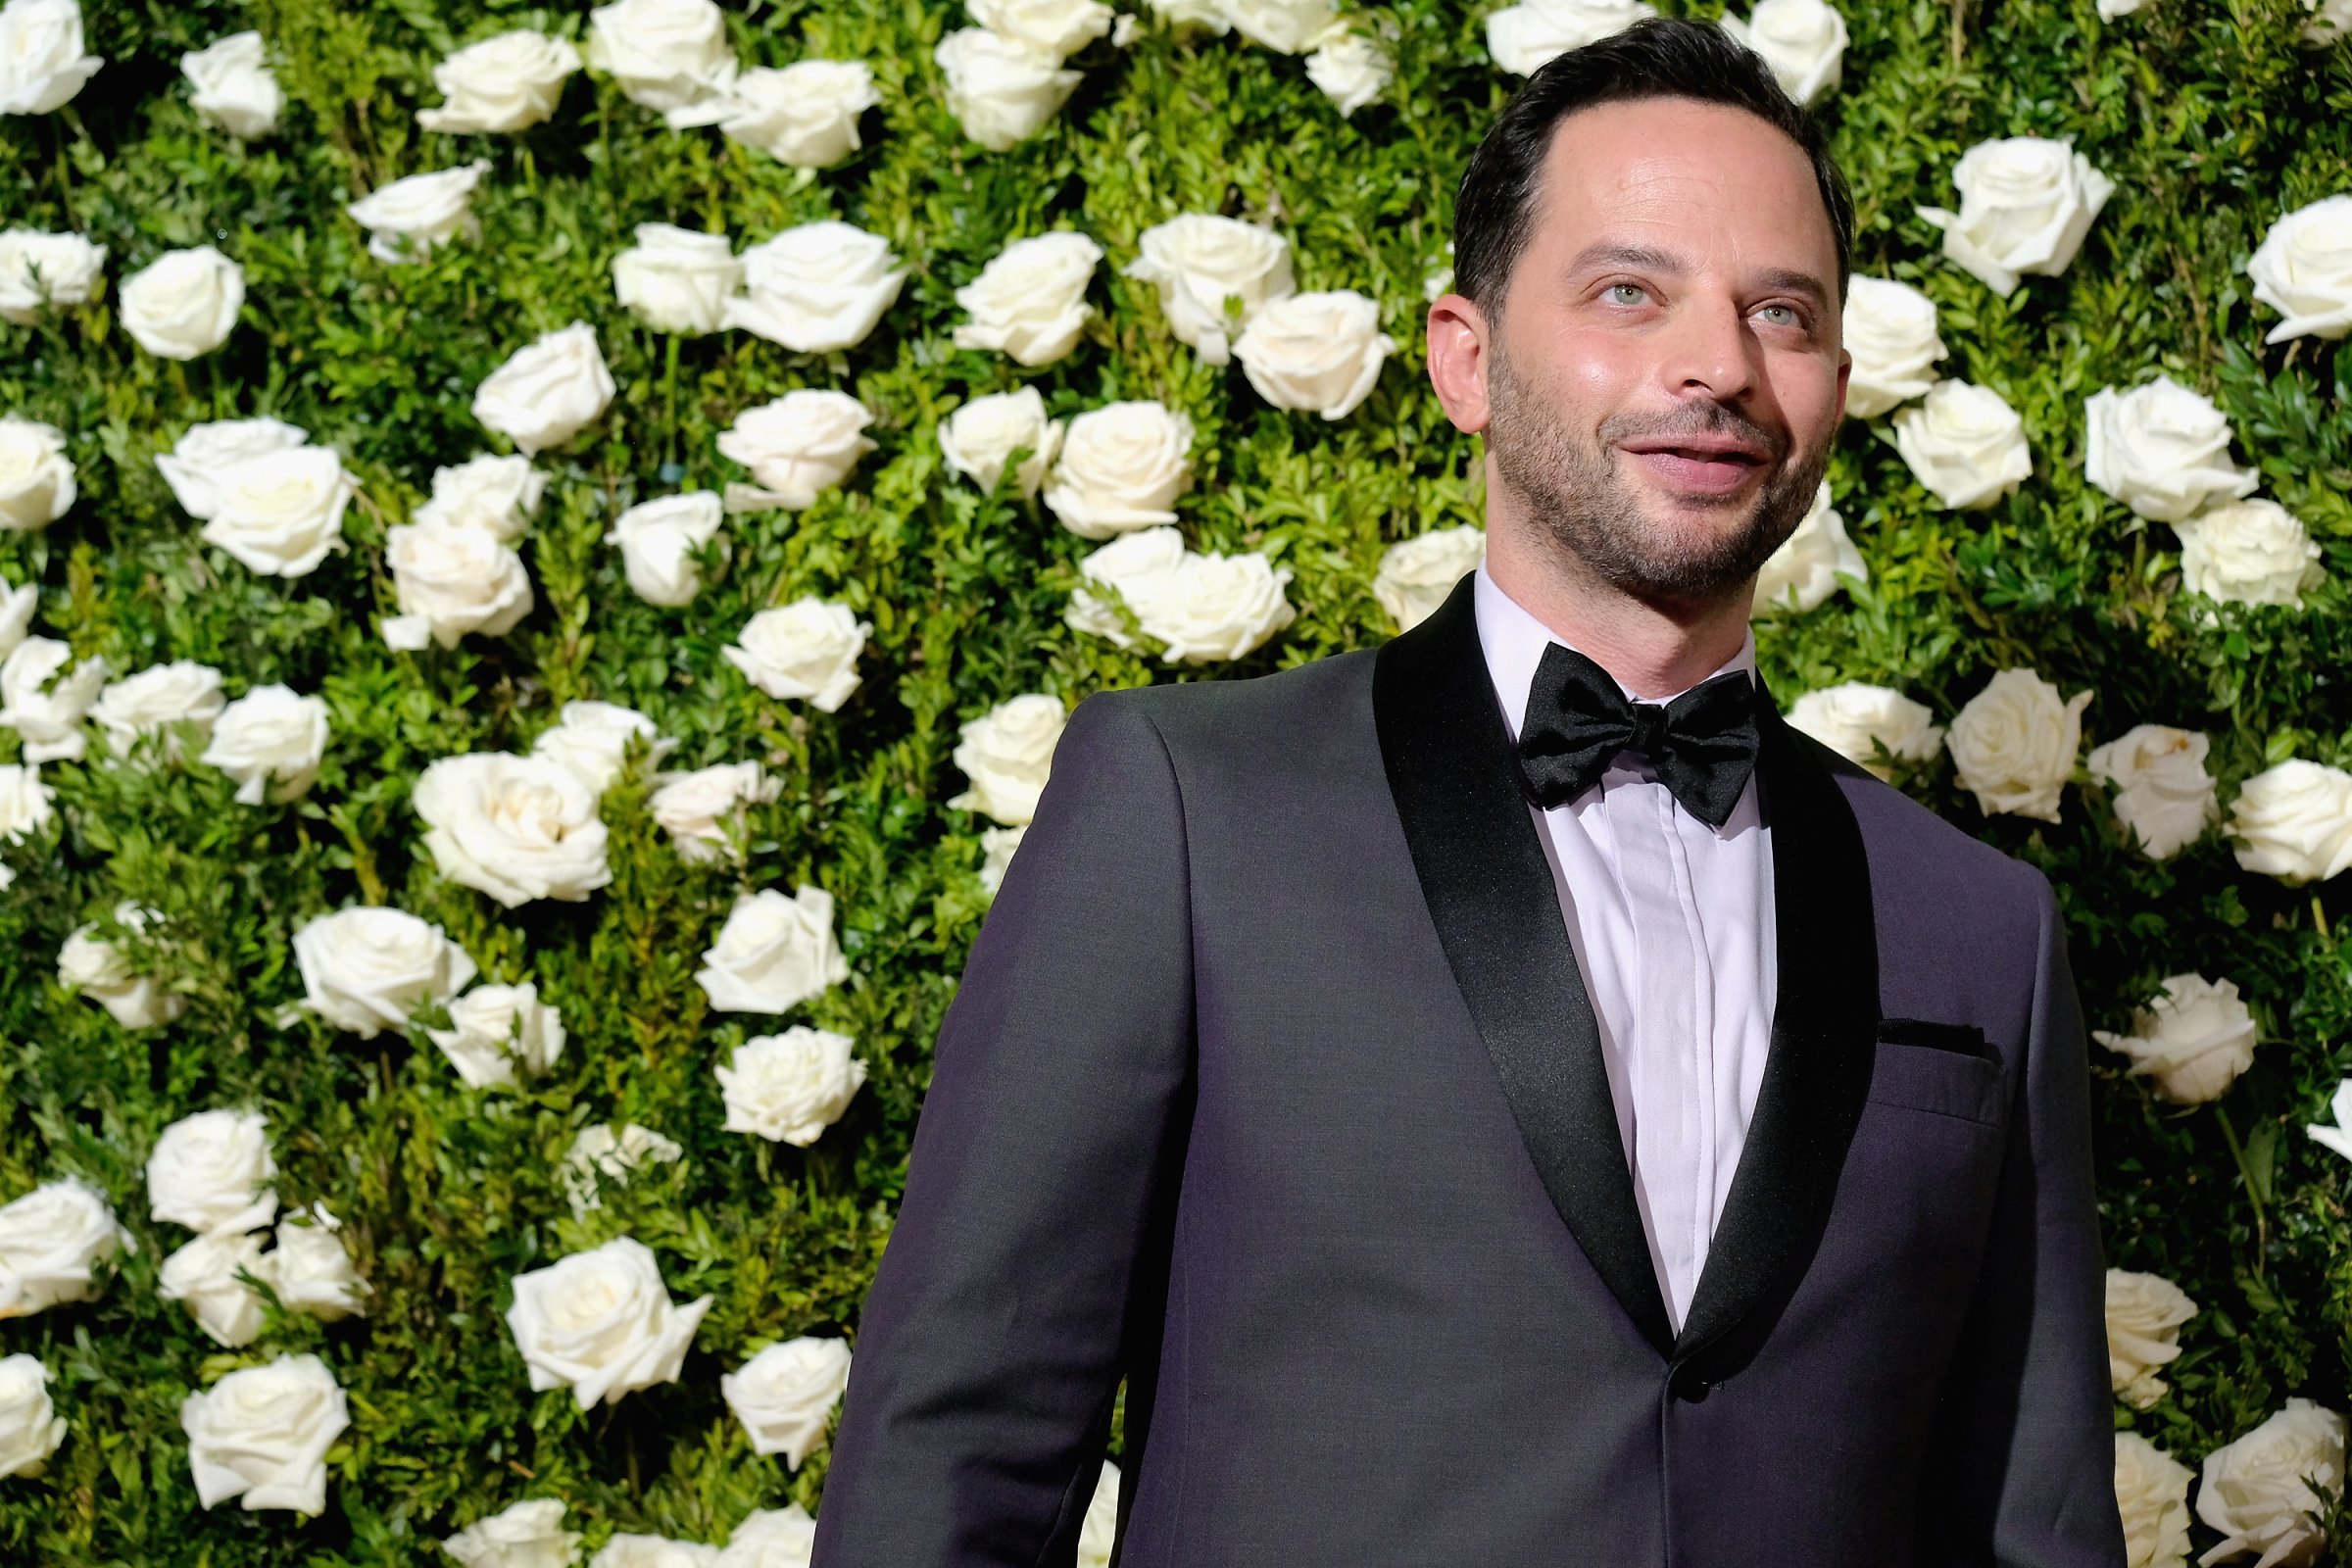 Nick Kroll attends the 2017 Tony Awards at Radio City Music Hall on June 11, 2017 in New York City.